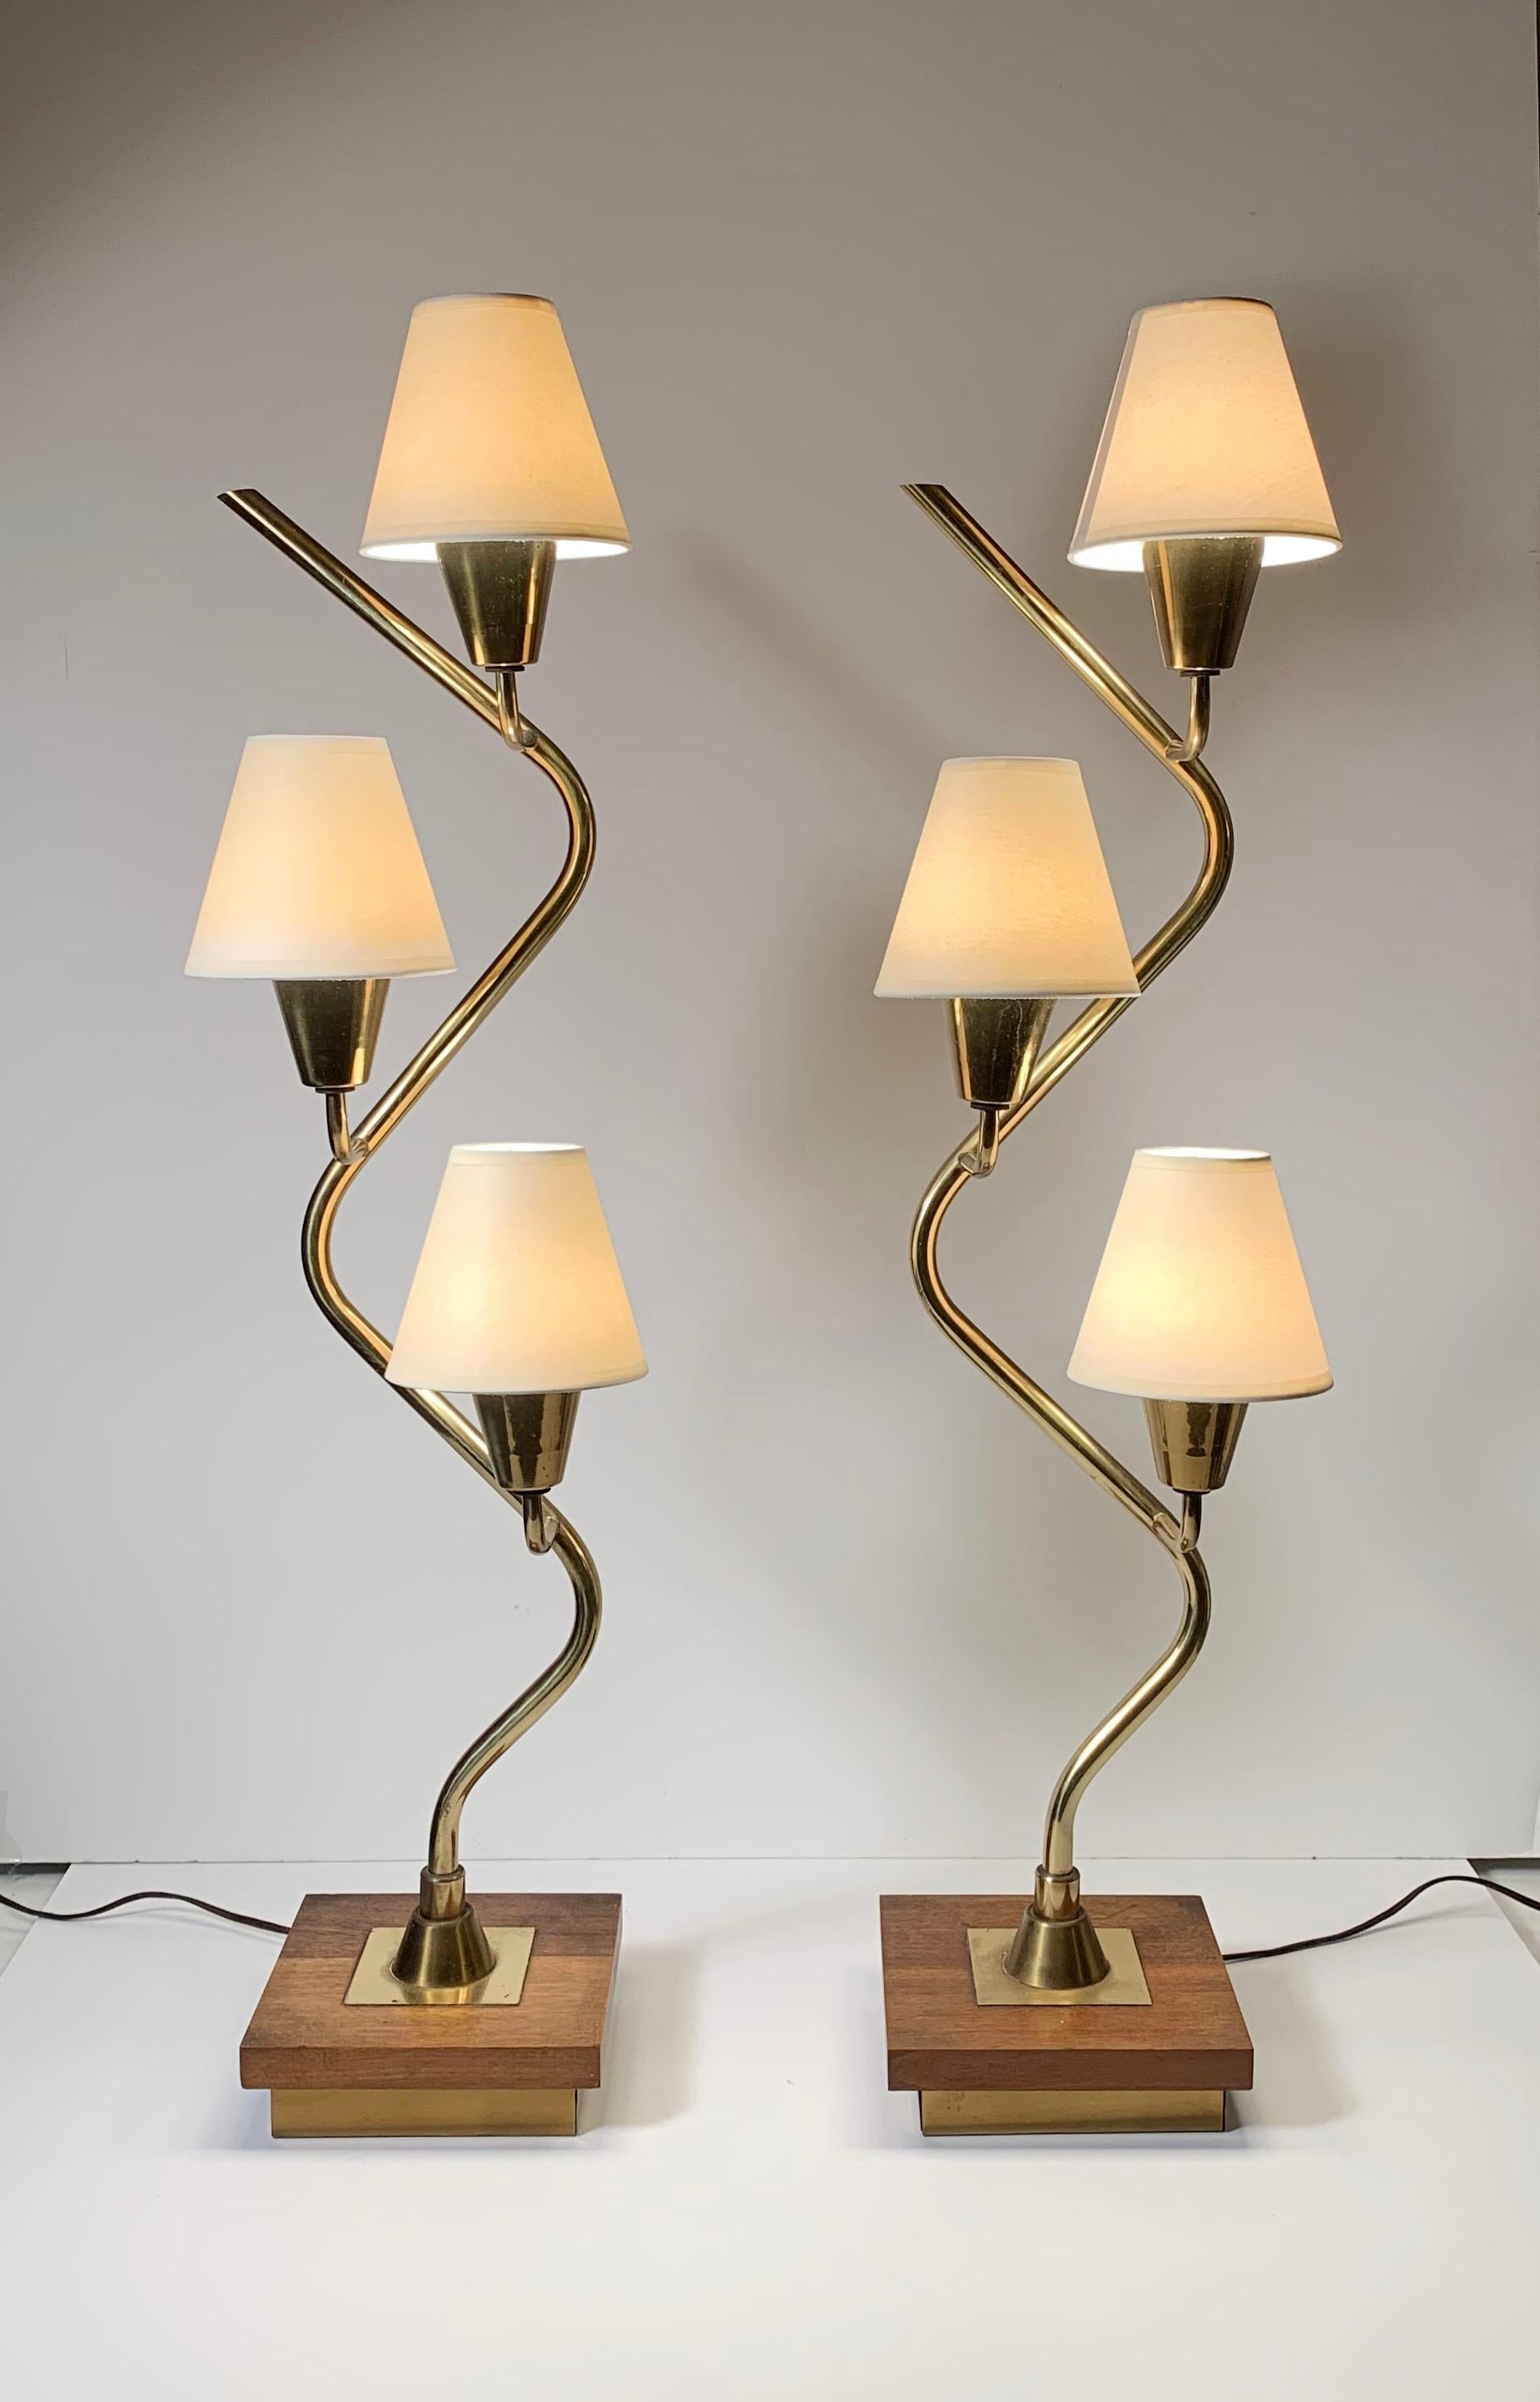 Mid-Century Modern vintage pair of serpentine table lamps.

Manner of Gino Sarfatti for Arredoluce, Lightolier

Measures: Wood base is 7